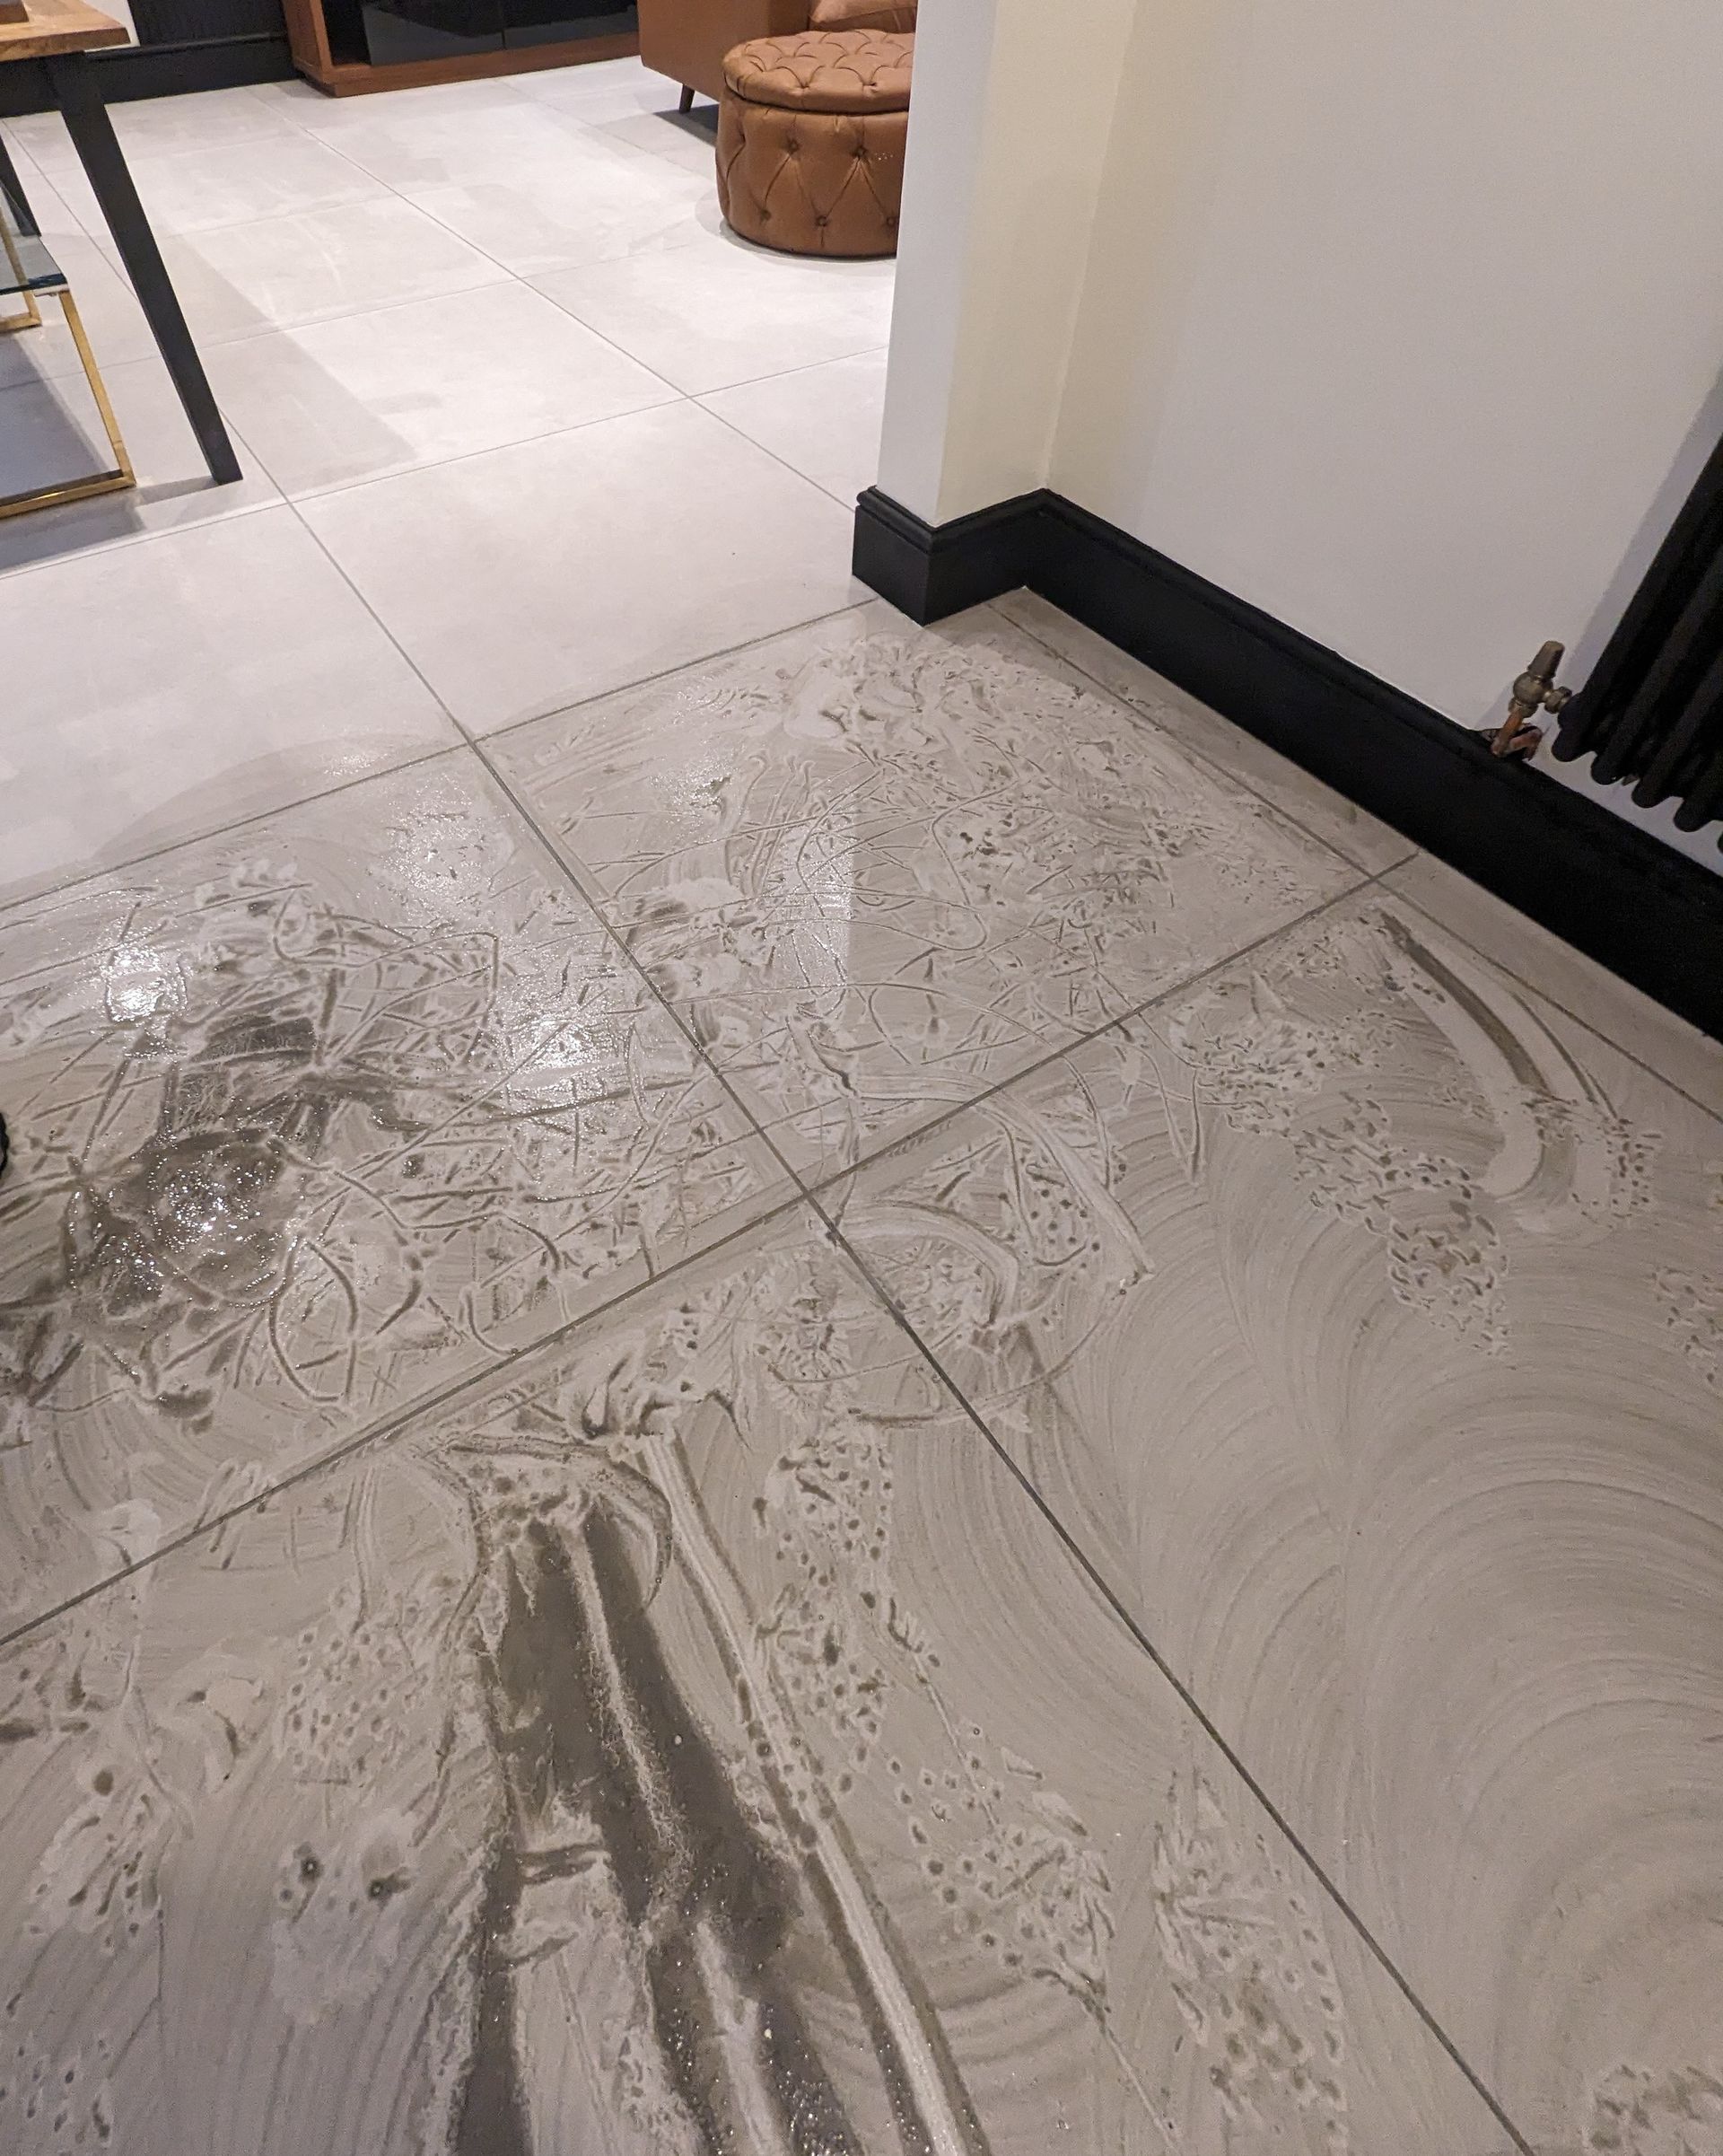 PORCELAIN TILES AND GROUT DEEP CLEANING AND SEALING IN WORSLEY, GREATER MANCHESTER